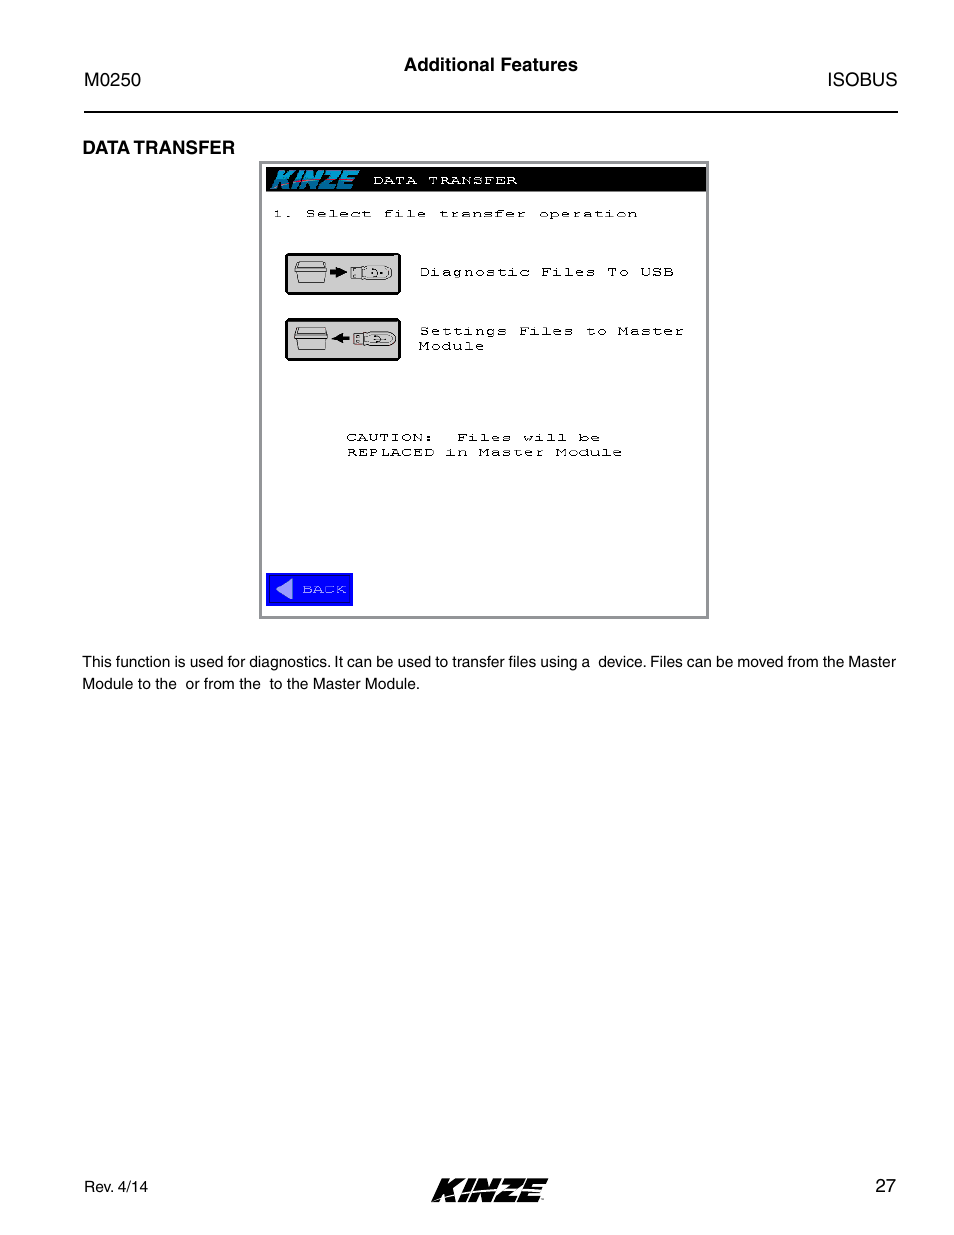 Additional features, Data transfer | Kinze ISOBUS Electronics Package (4900) Rev. 4/14 User Manual | Page 31 / 60